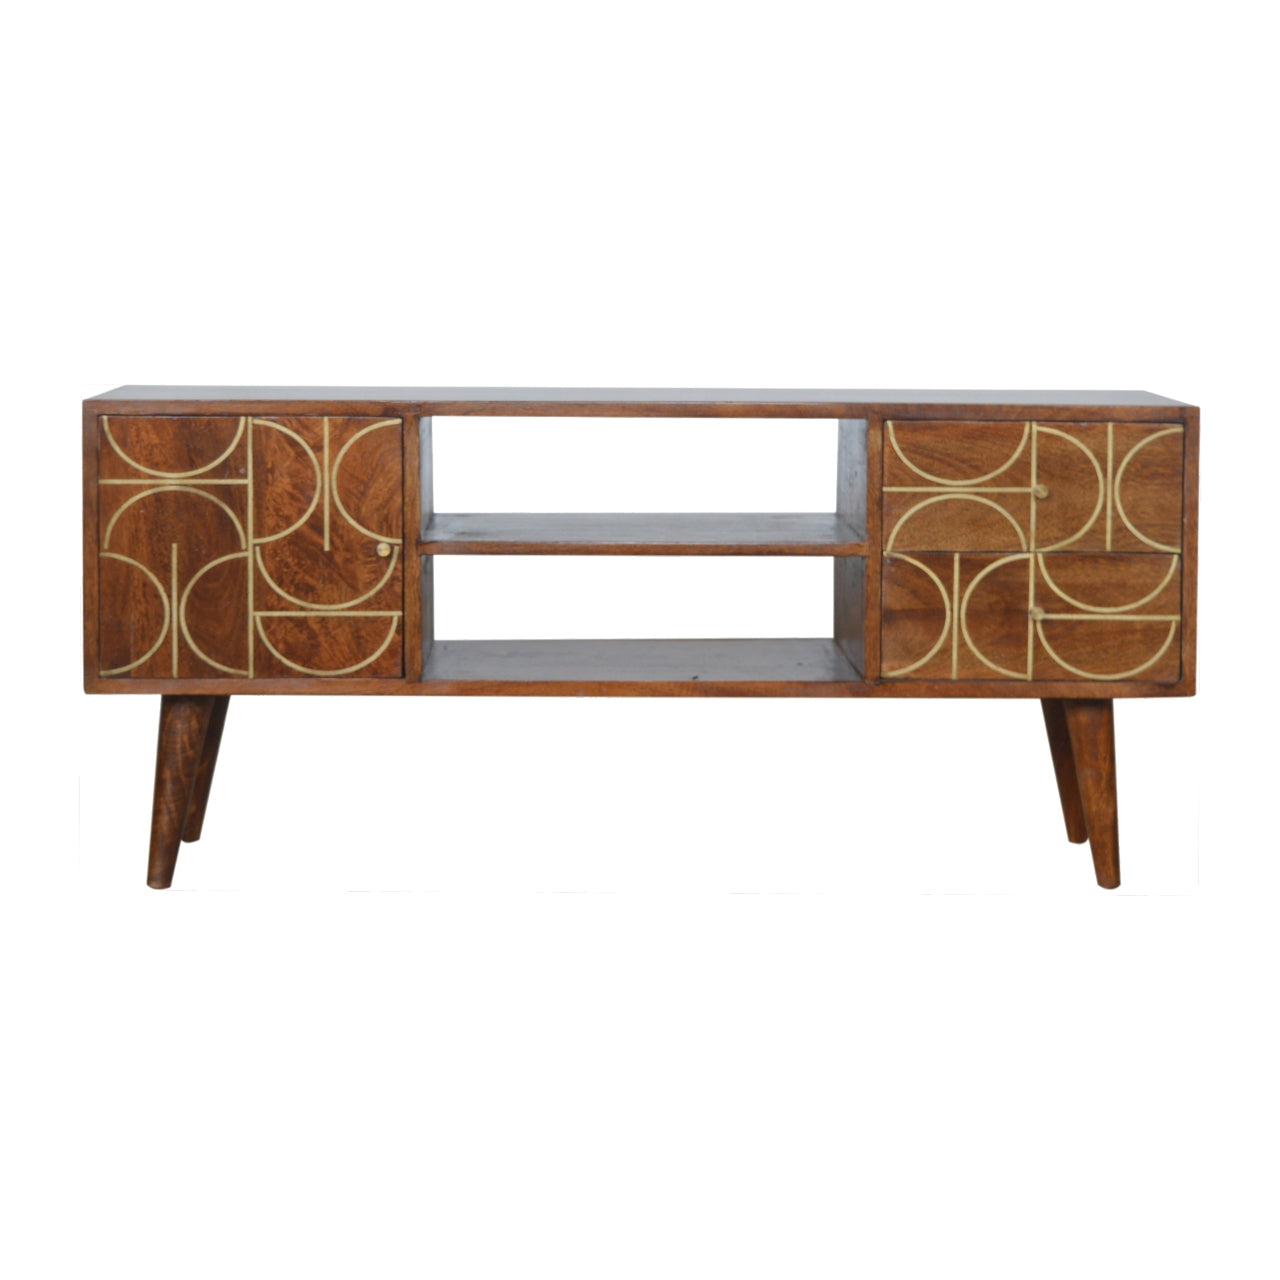 View Chestnut Inlay Abstract TV Unit information